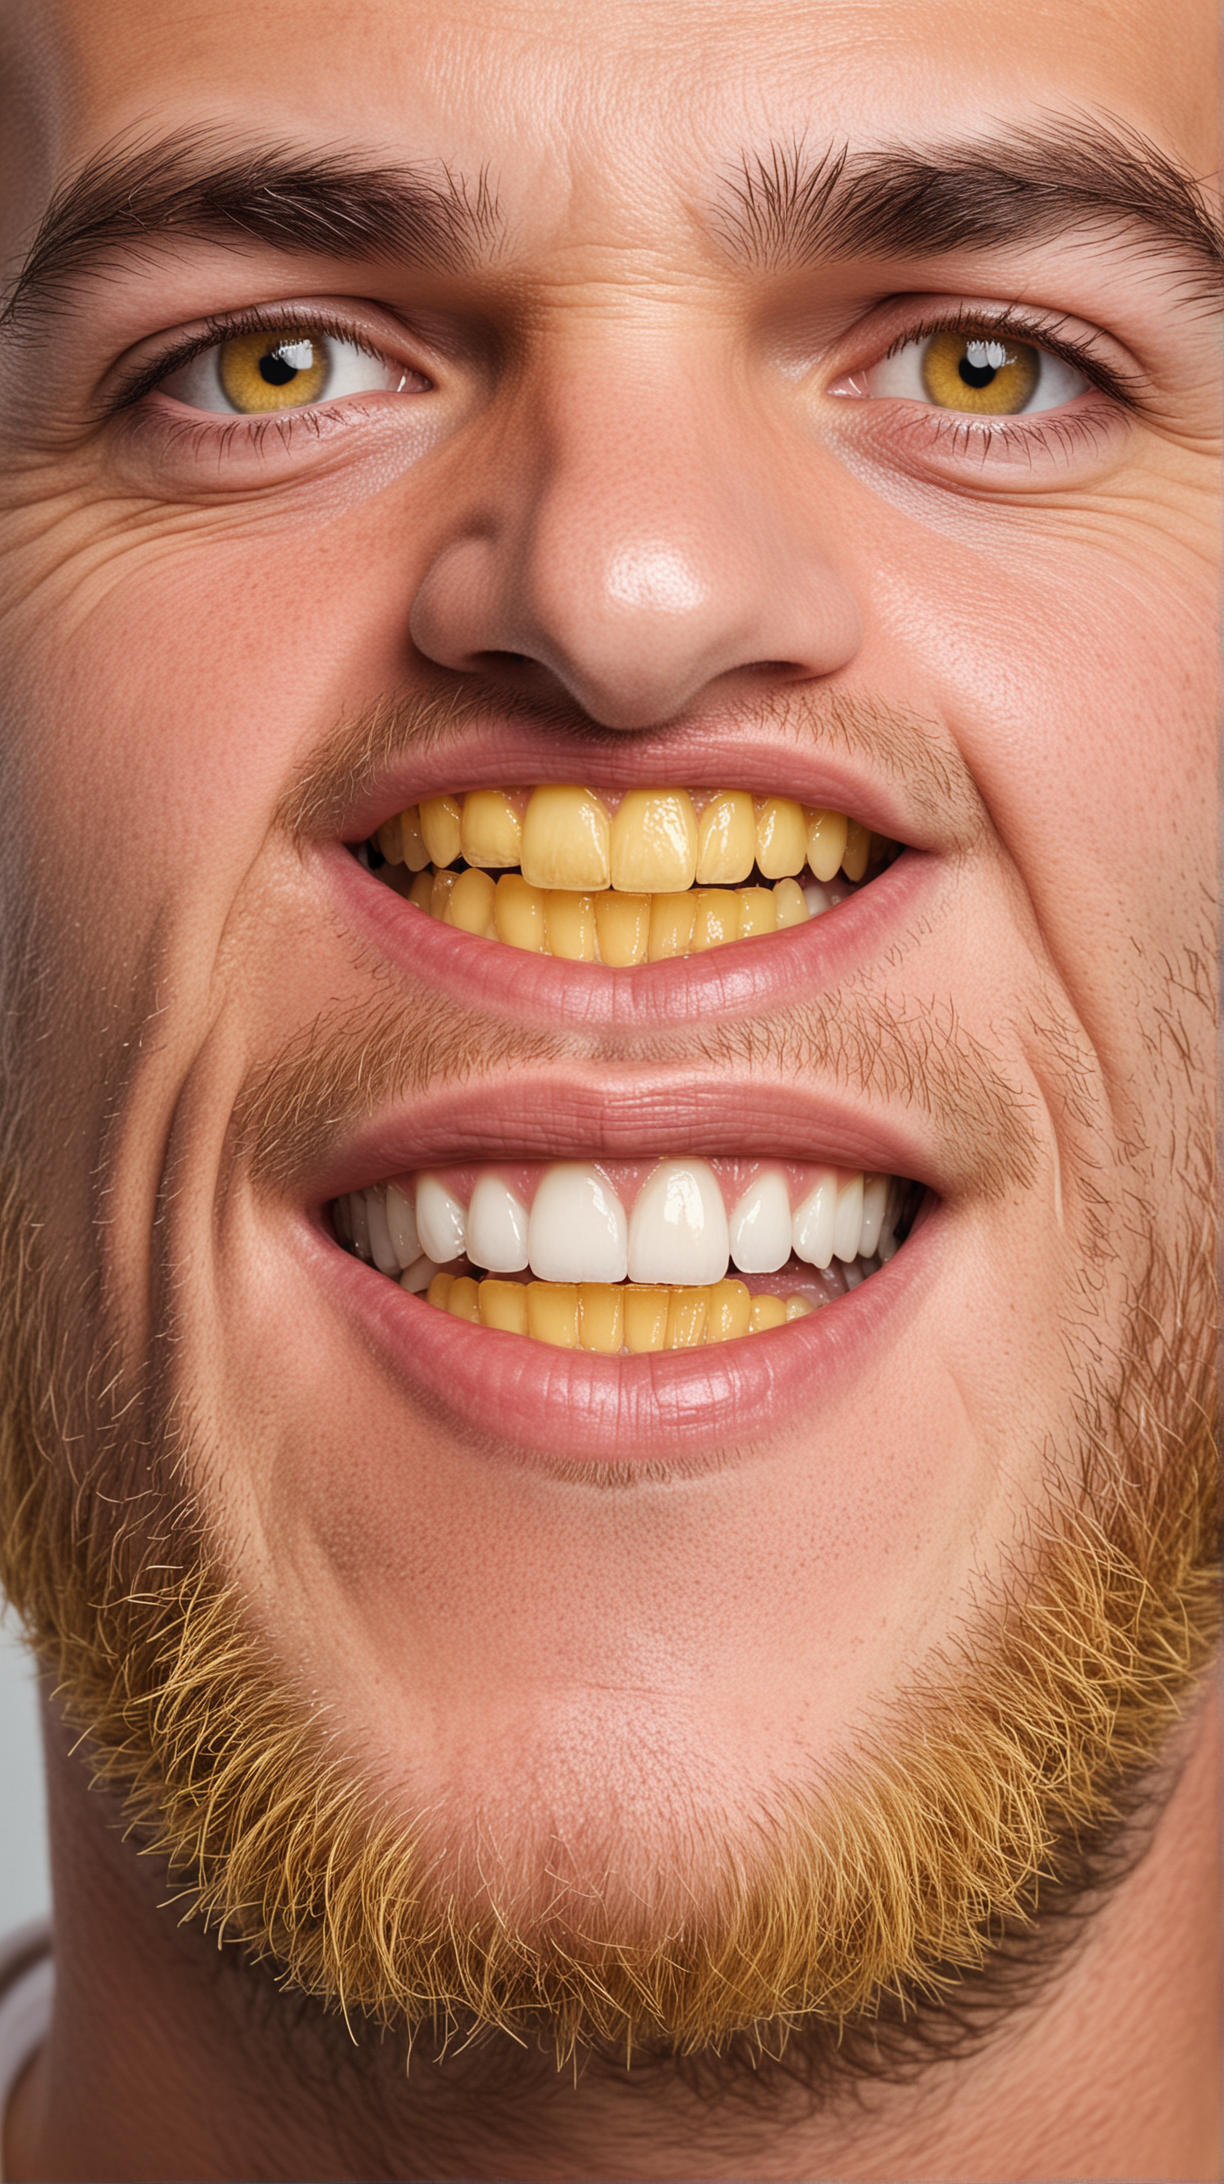 Smiling Man with Yellow Teeth